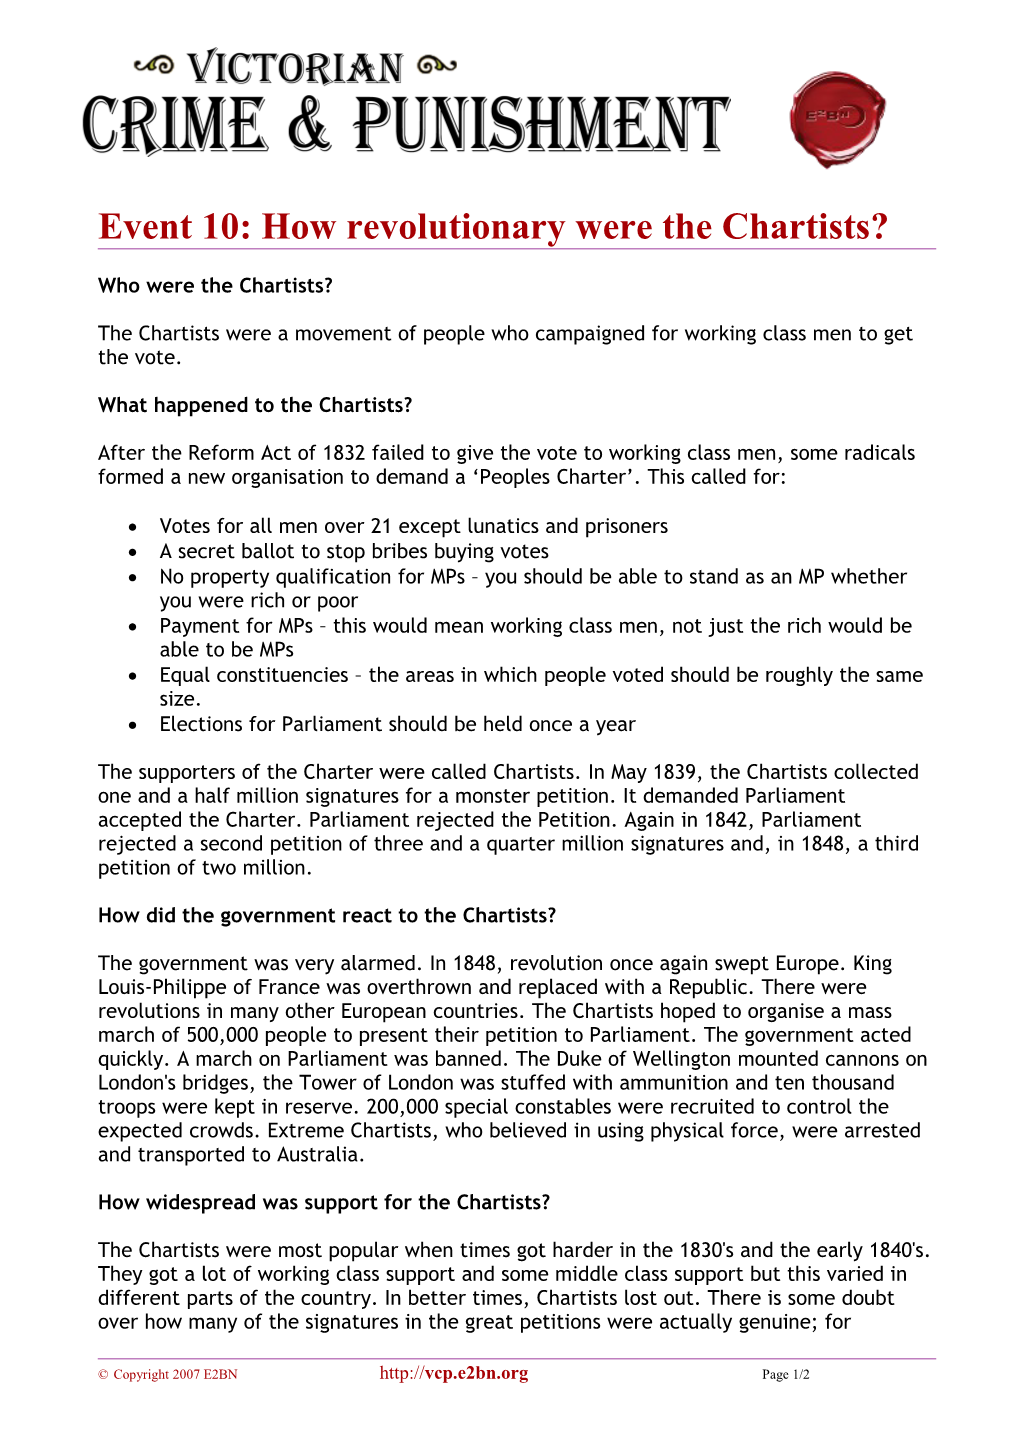 Event 10: How Revolutionary Were the Chartists?